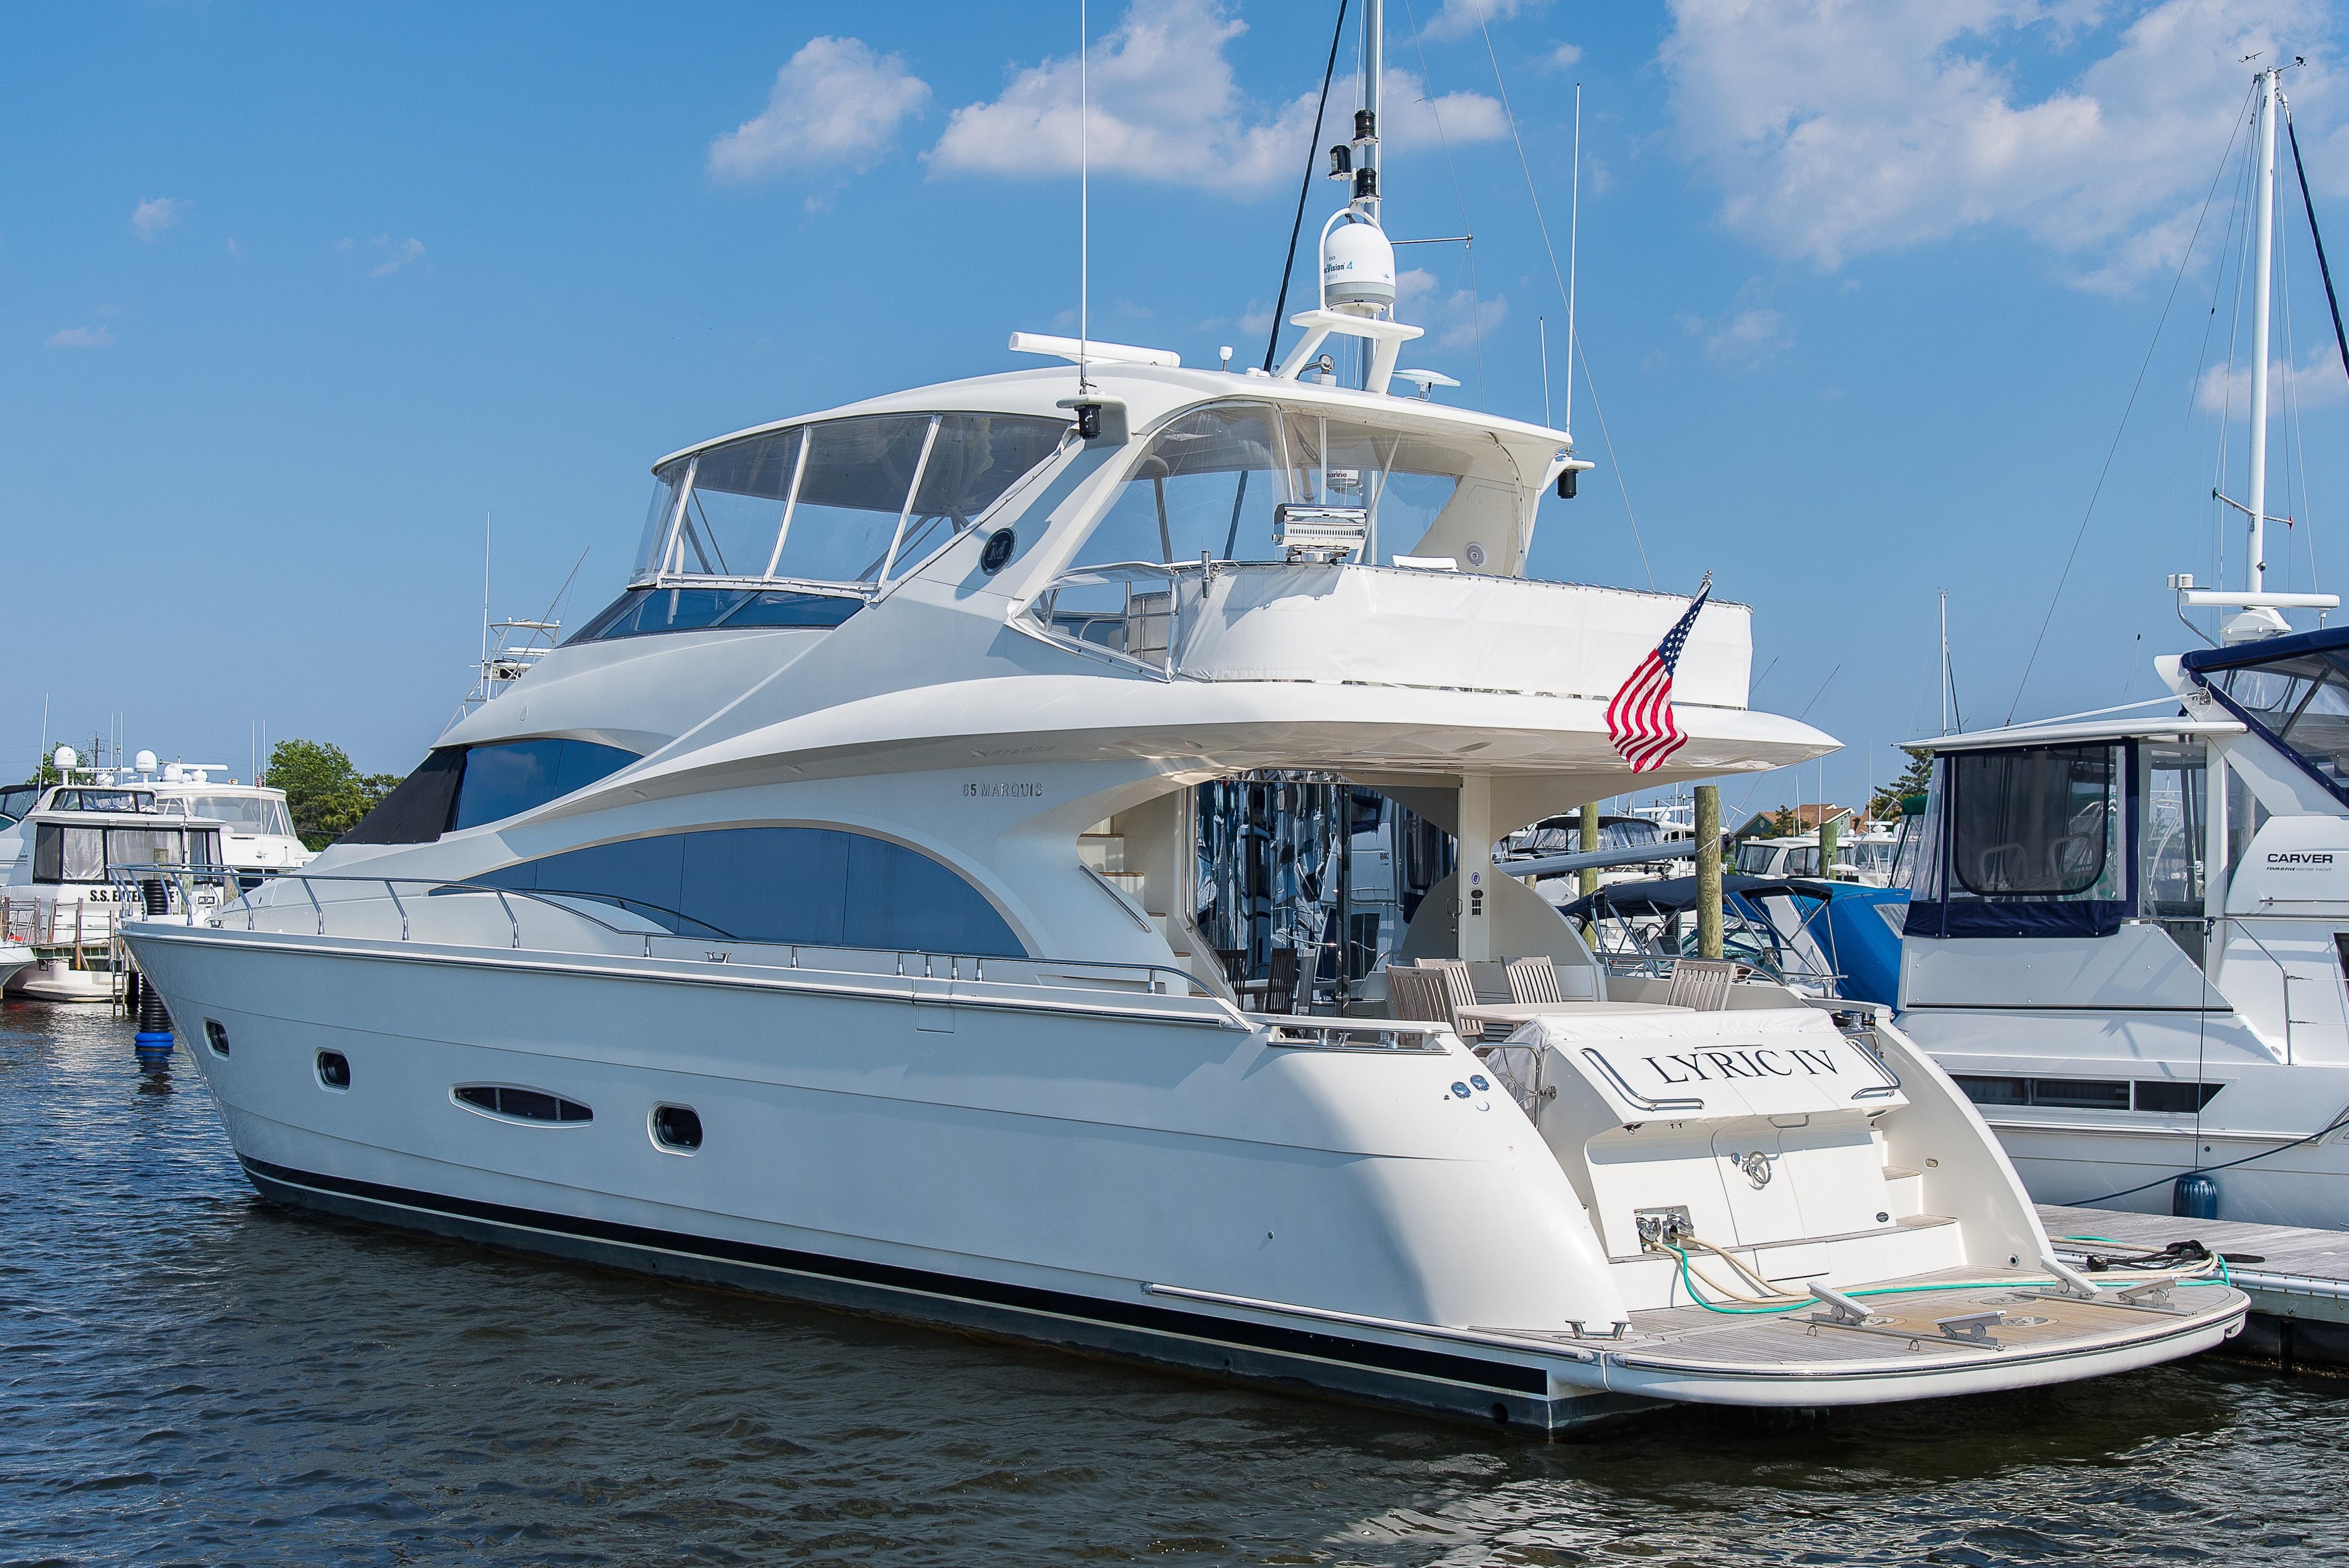 65 foot yacht for sale